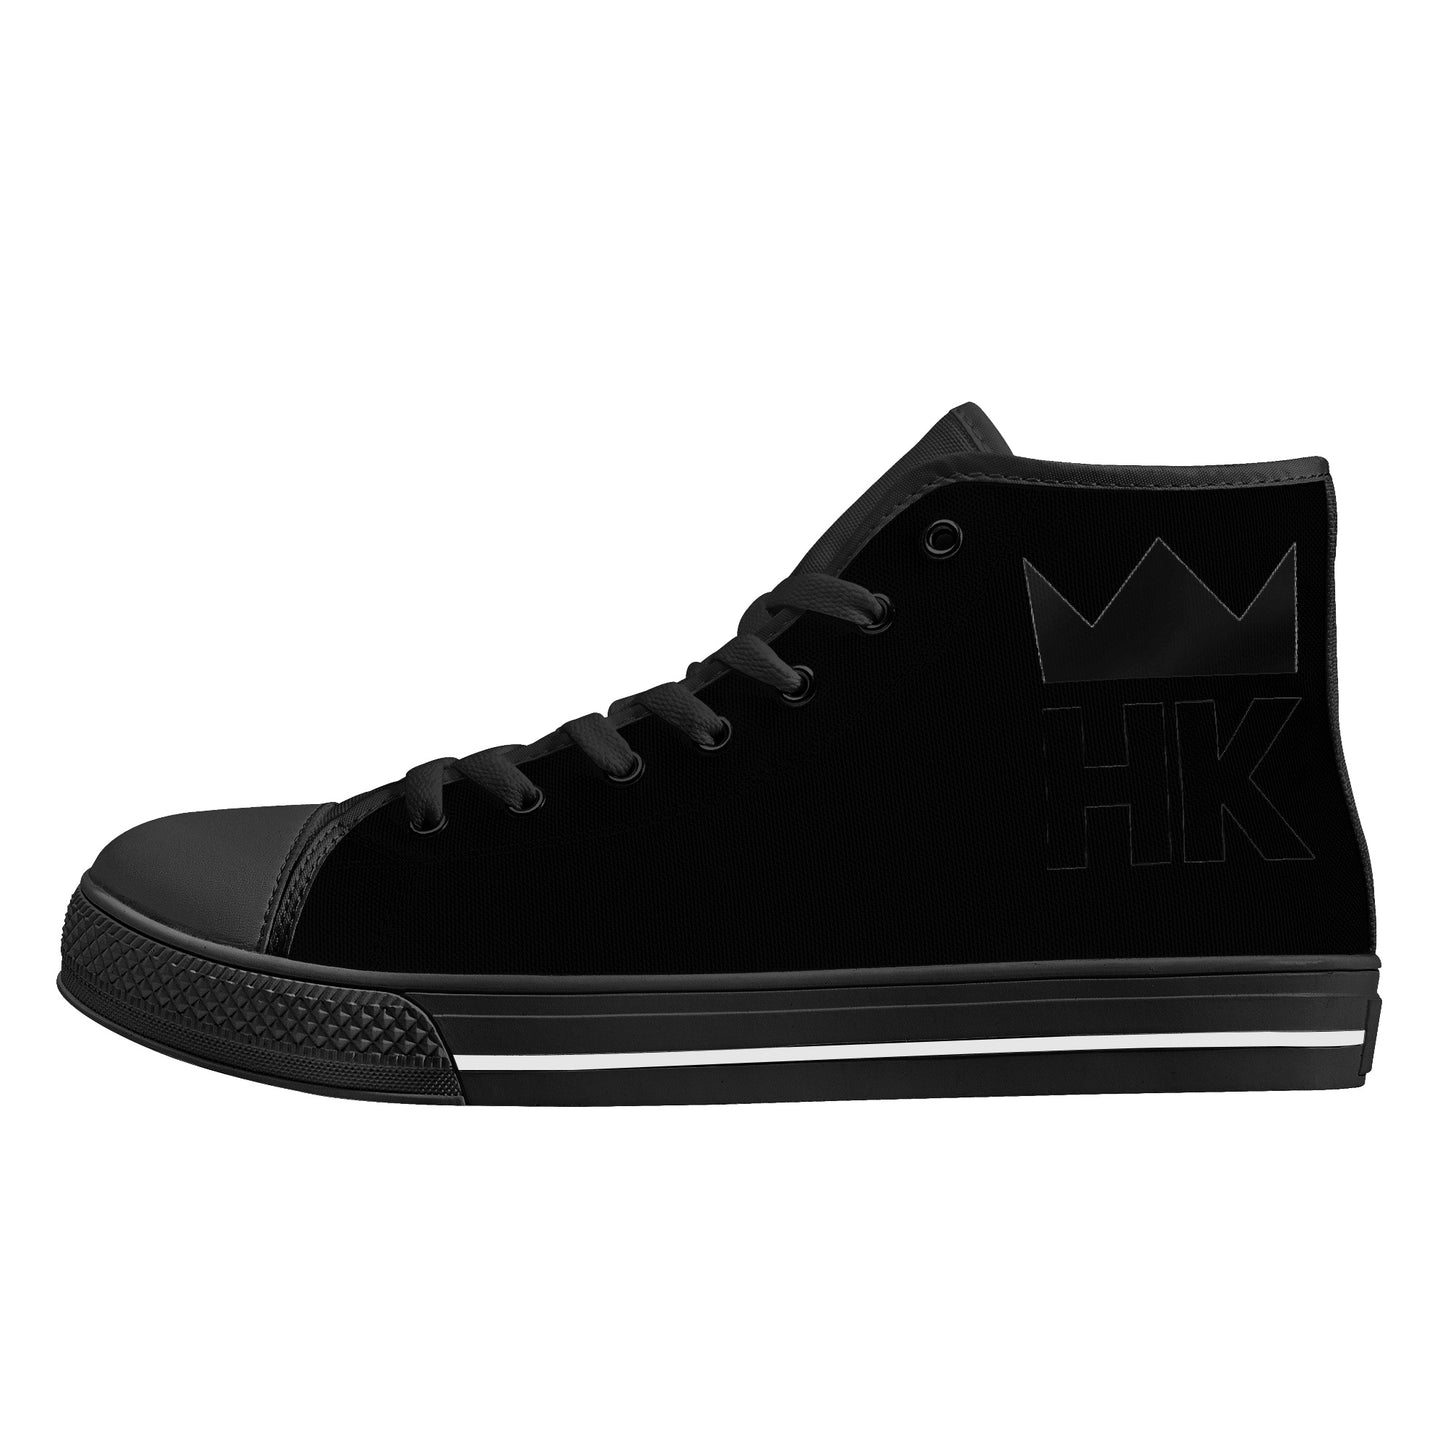 The H & K Ankh Hightop Canvas Shoes